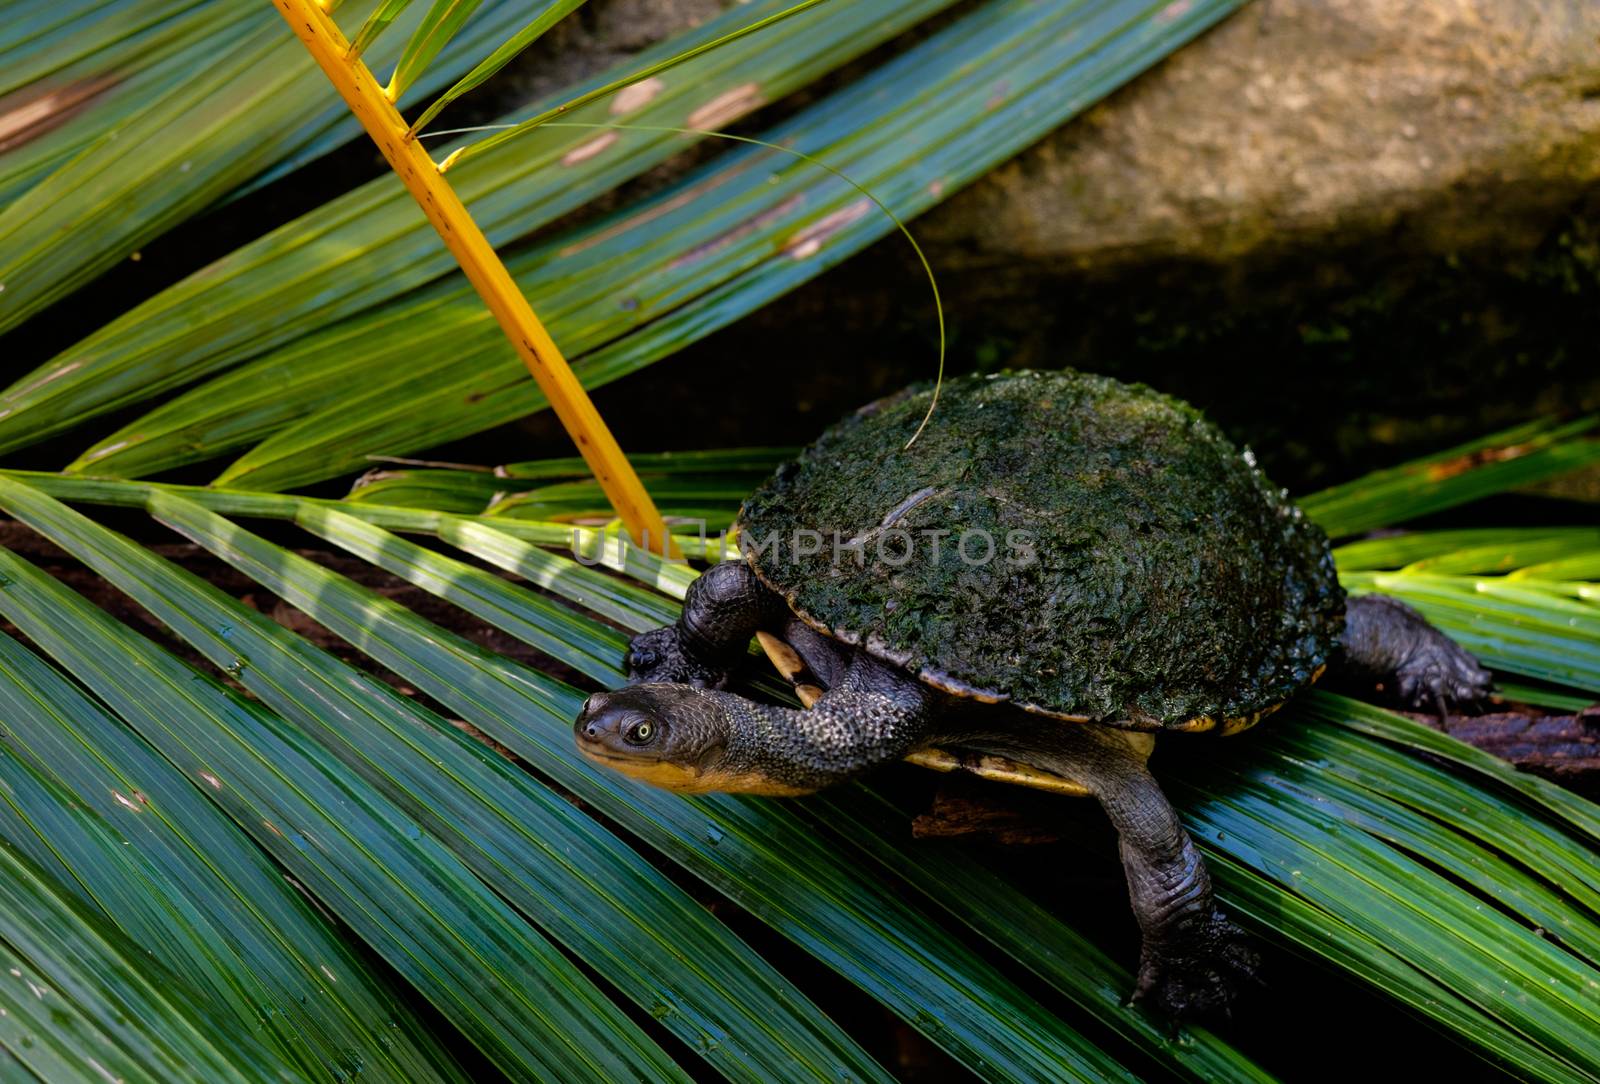 Eastern long-necked turtle covered by algae by rainfallsup